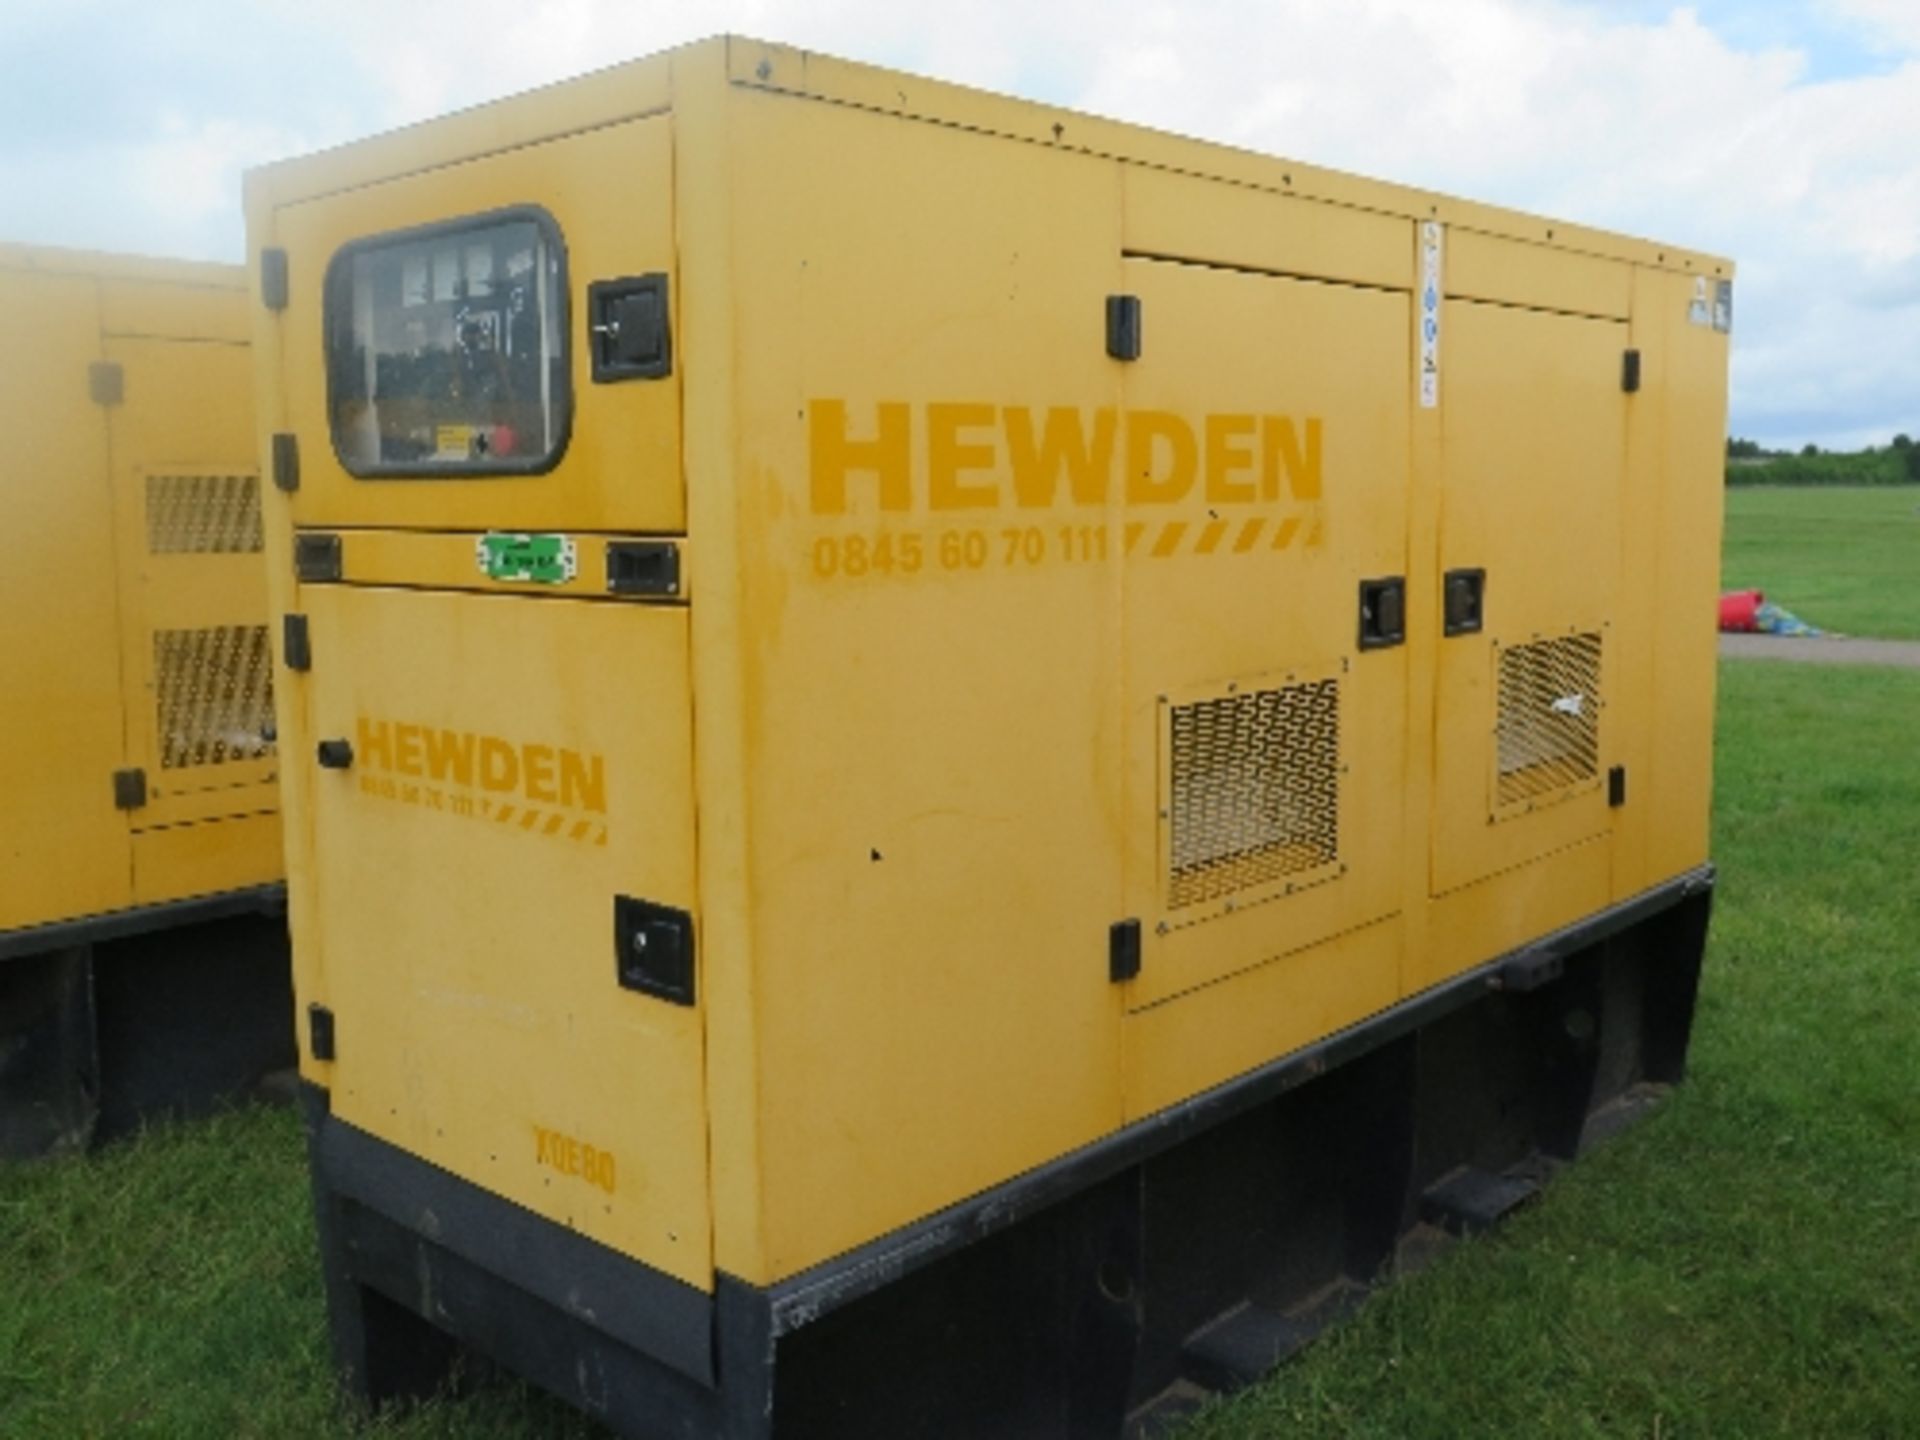 Caterpillar XQE80 generator 11729 hrs 157805
PERKINS - RUNS AND MAKES POWER
ALL LOTS are SOLD AS